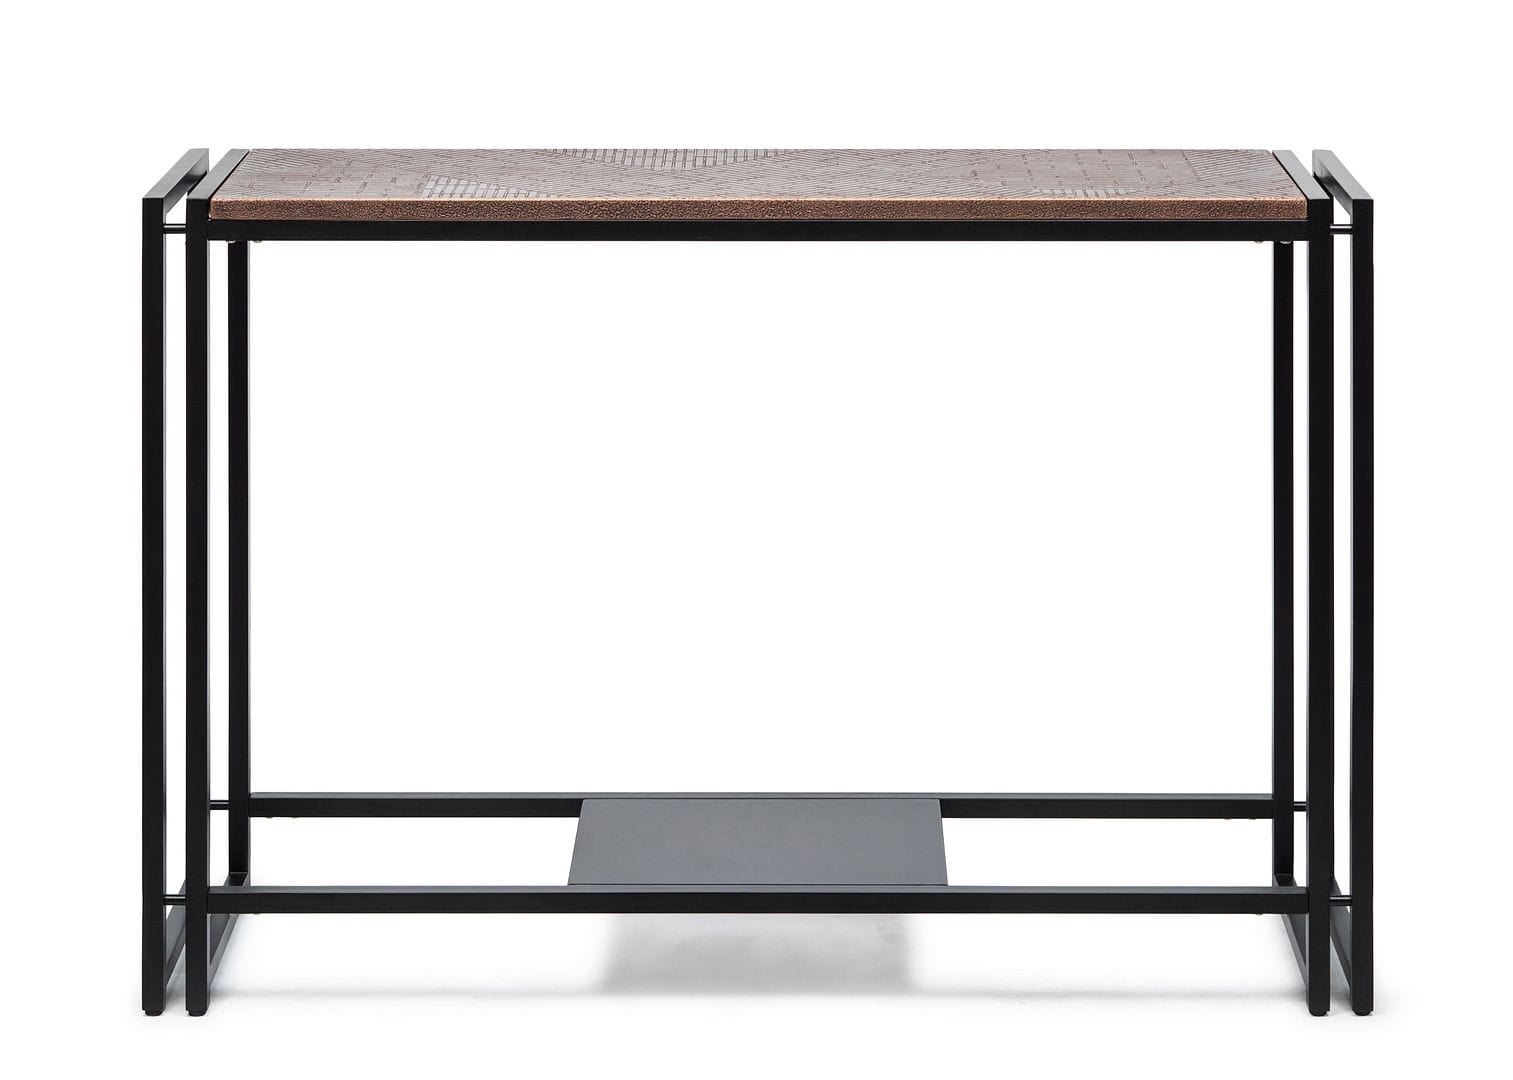 Elevate Your Hallway Decor with a Sleek Copper Console Table